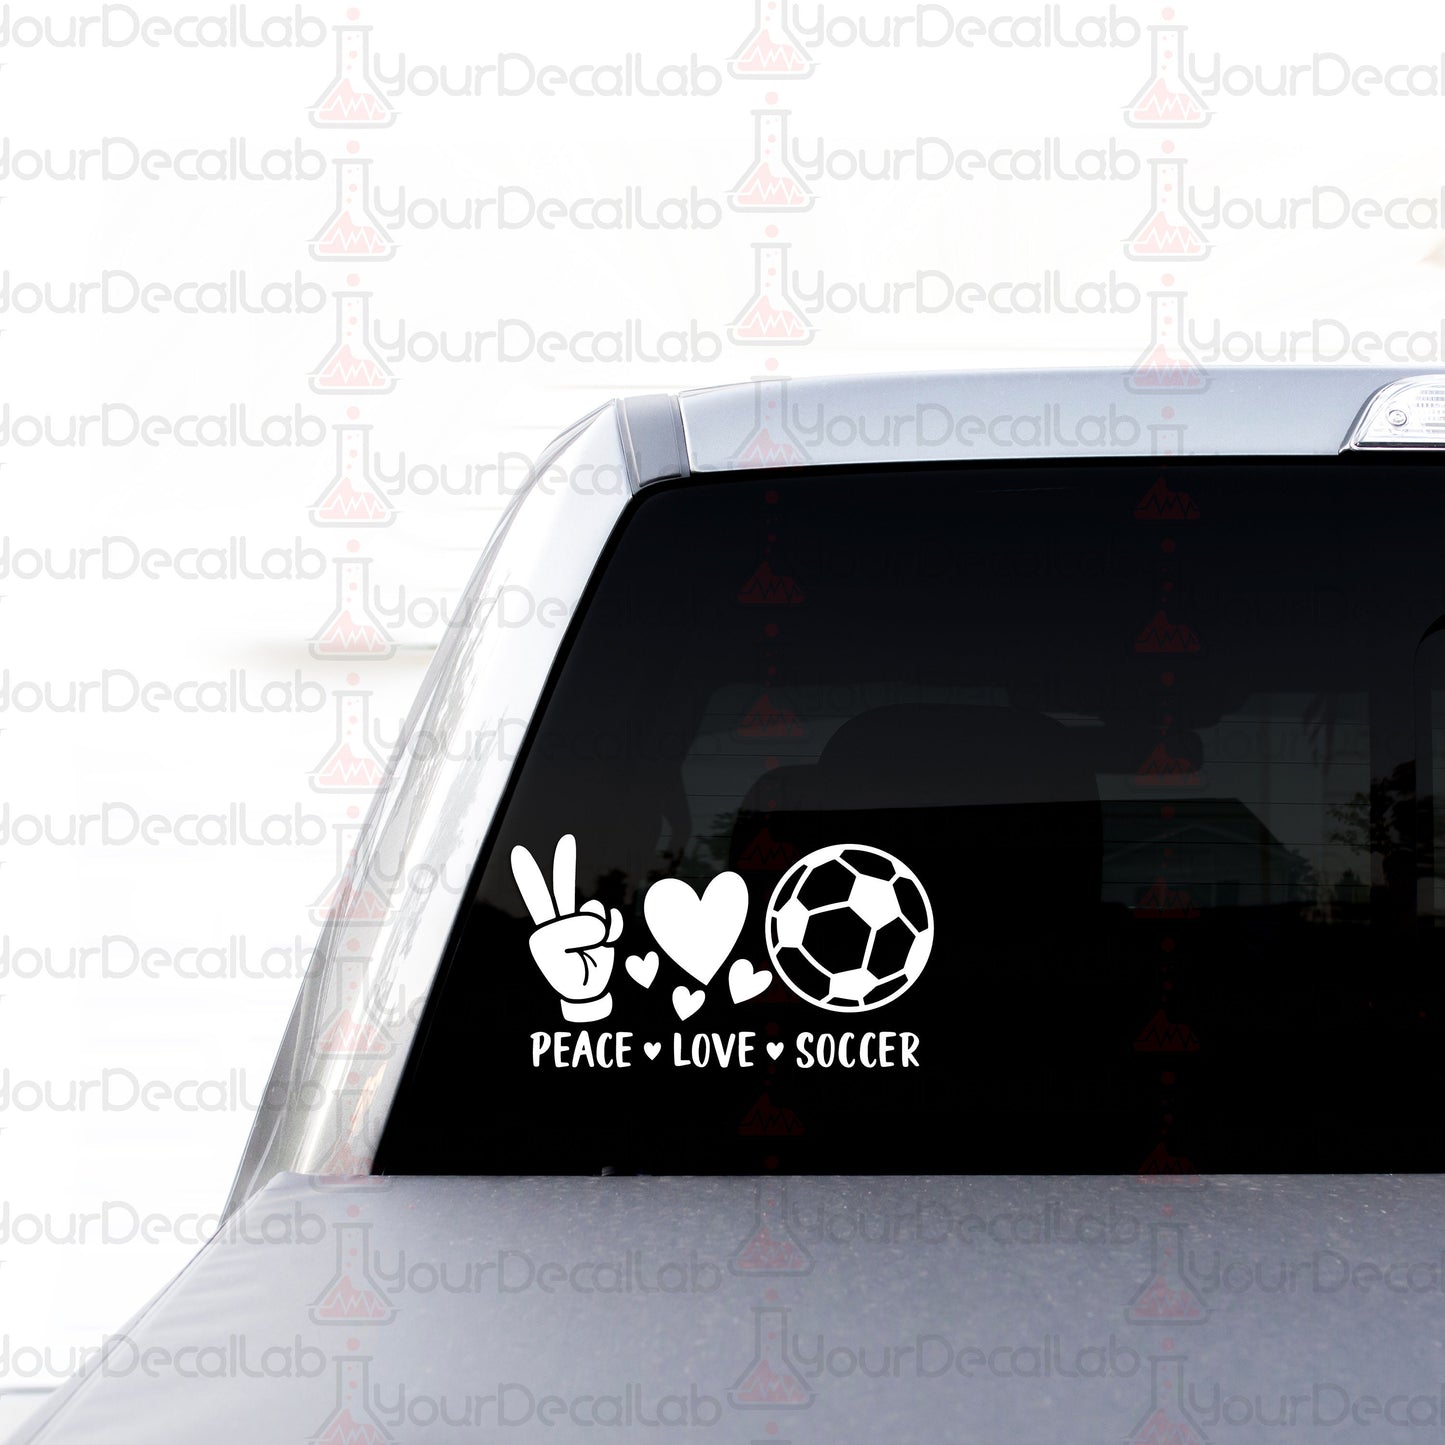 peace love soccer sticker on the back of a car